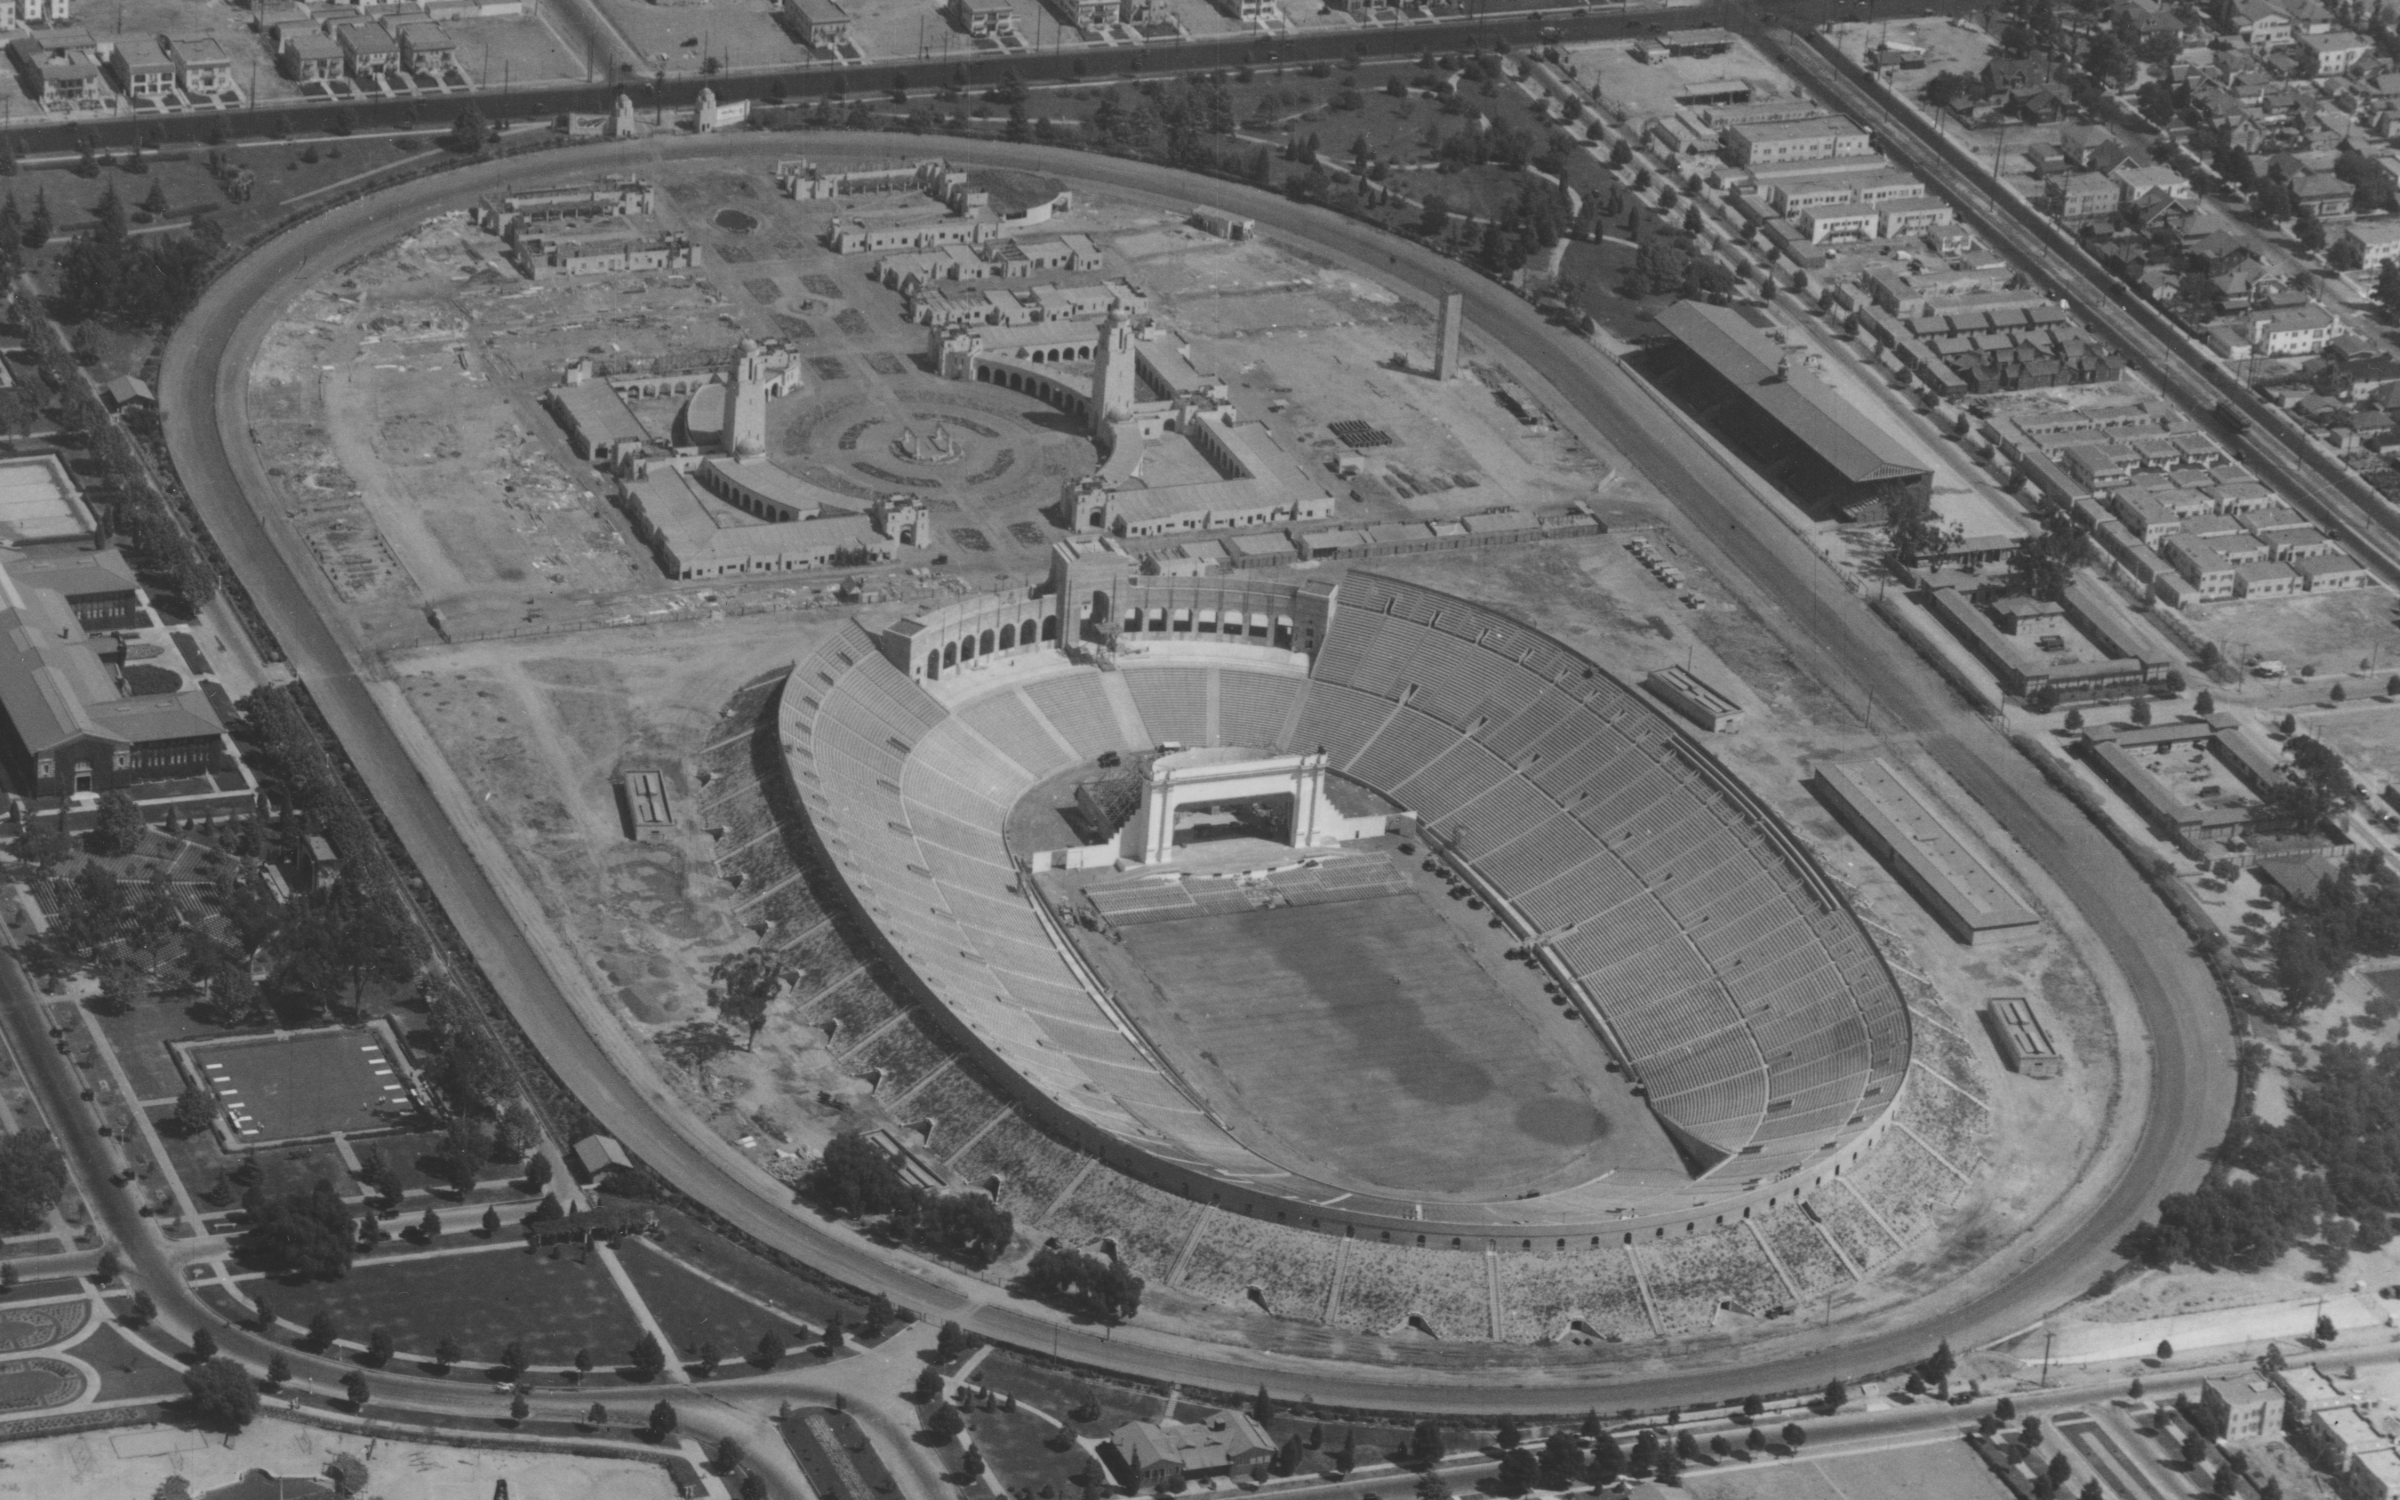 The Los Angeles Coliseum in 1923.